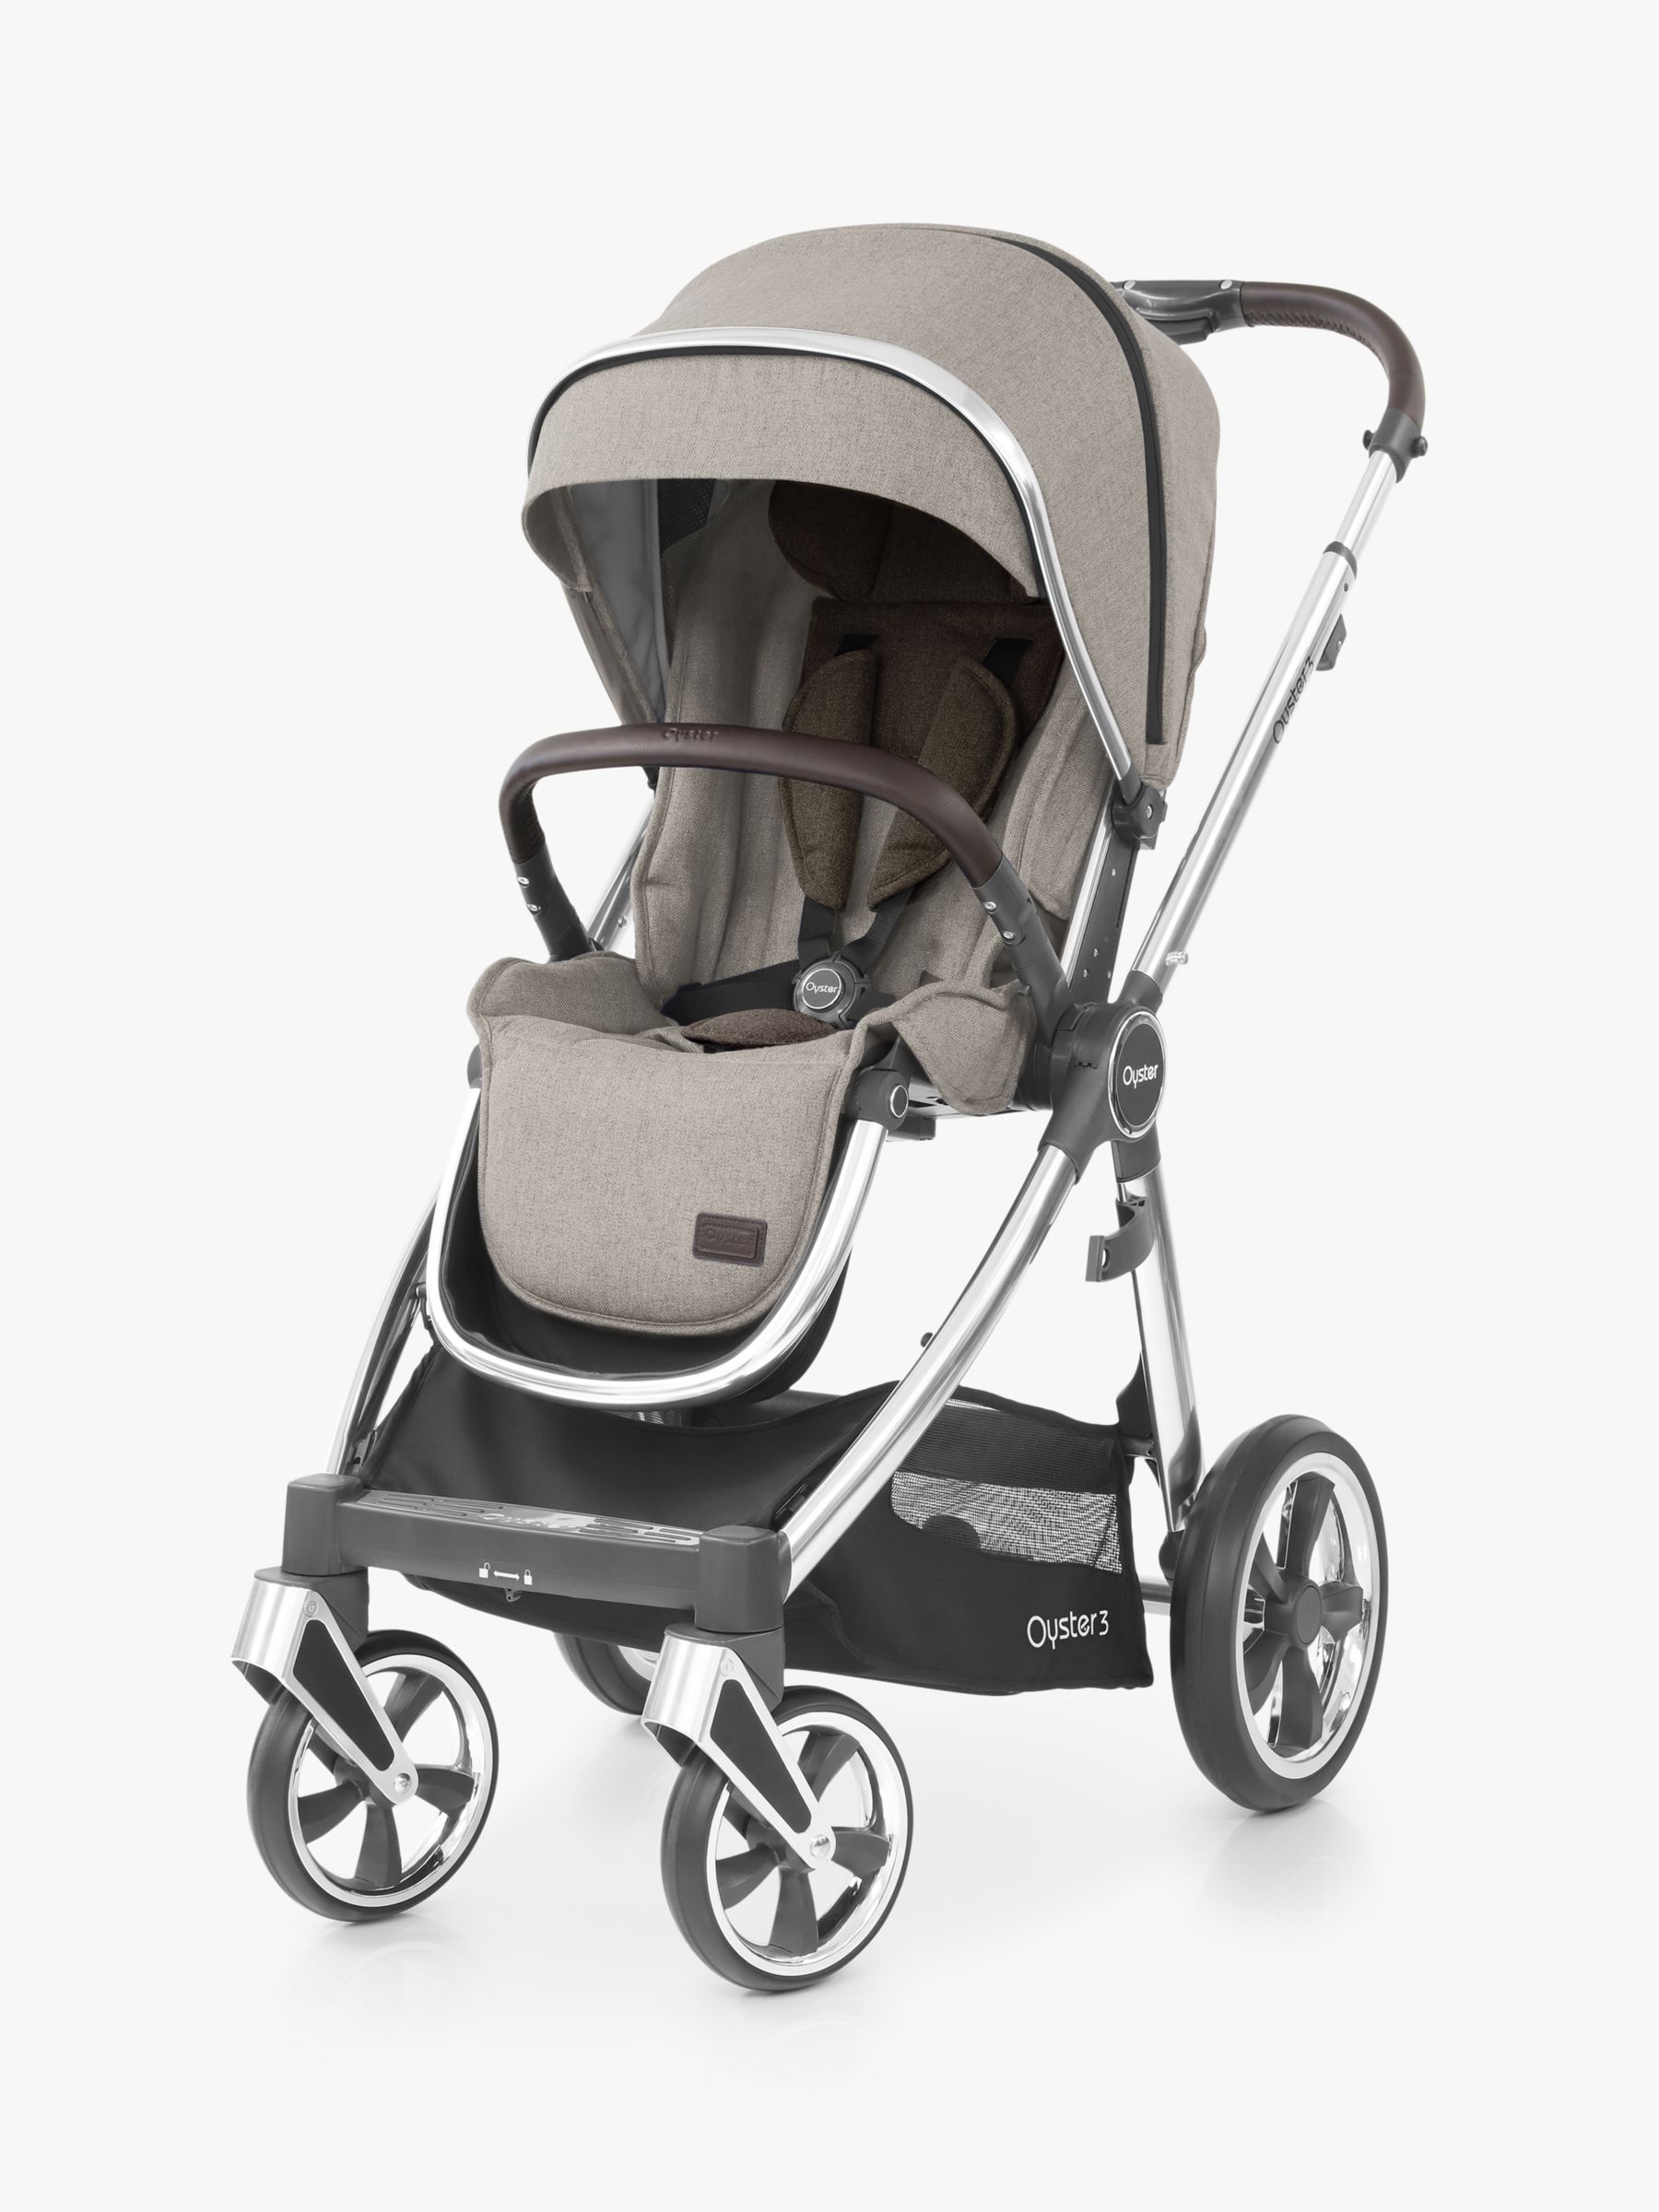 Image of Oyster3 Pushchair MirrorPebble